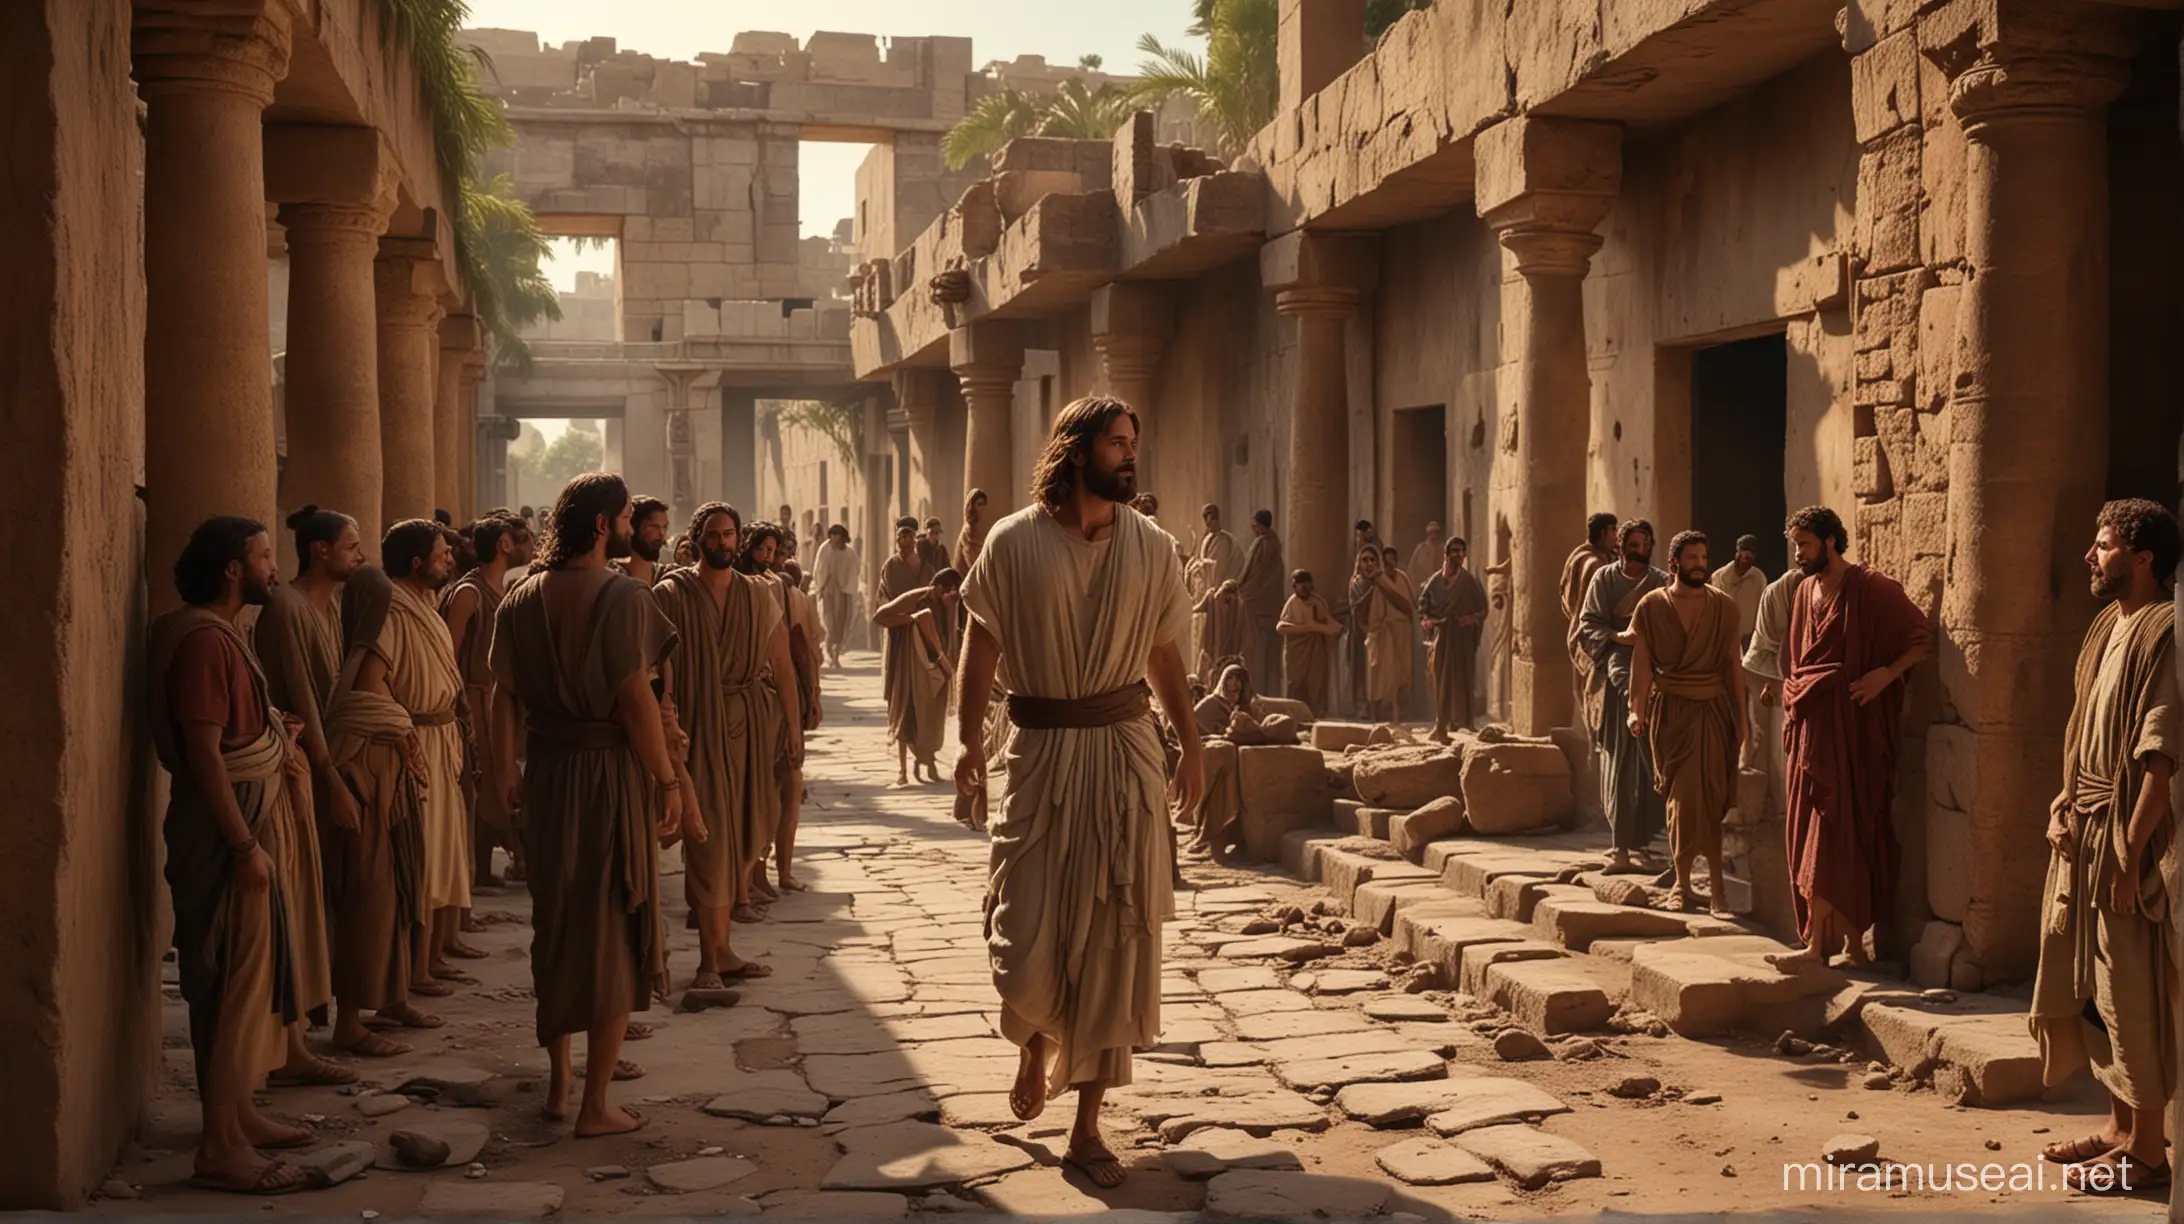 create image of Jesus in a 1st century Capernaum house, gathered with his followers. 6k resolution, more realistic, based on the movie The Passion of the Christ.